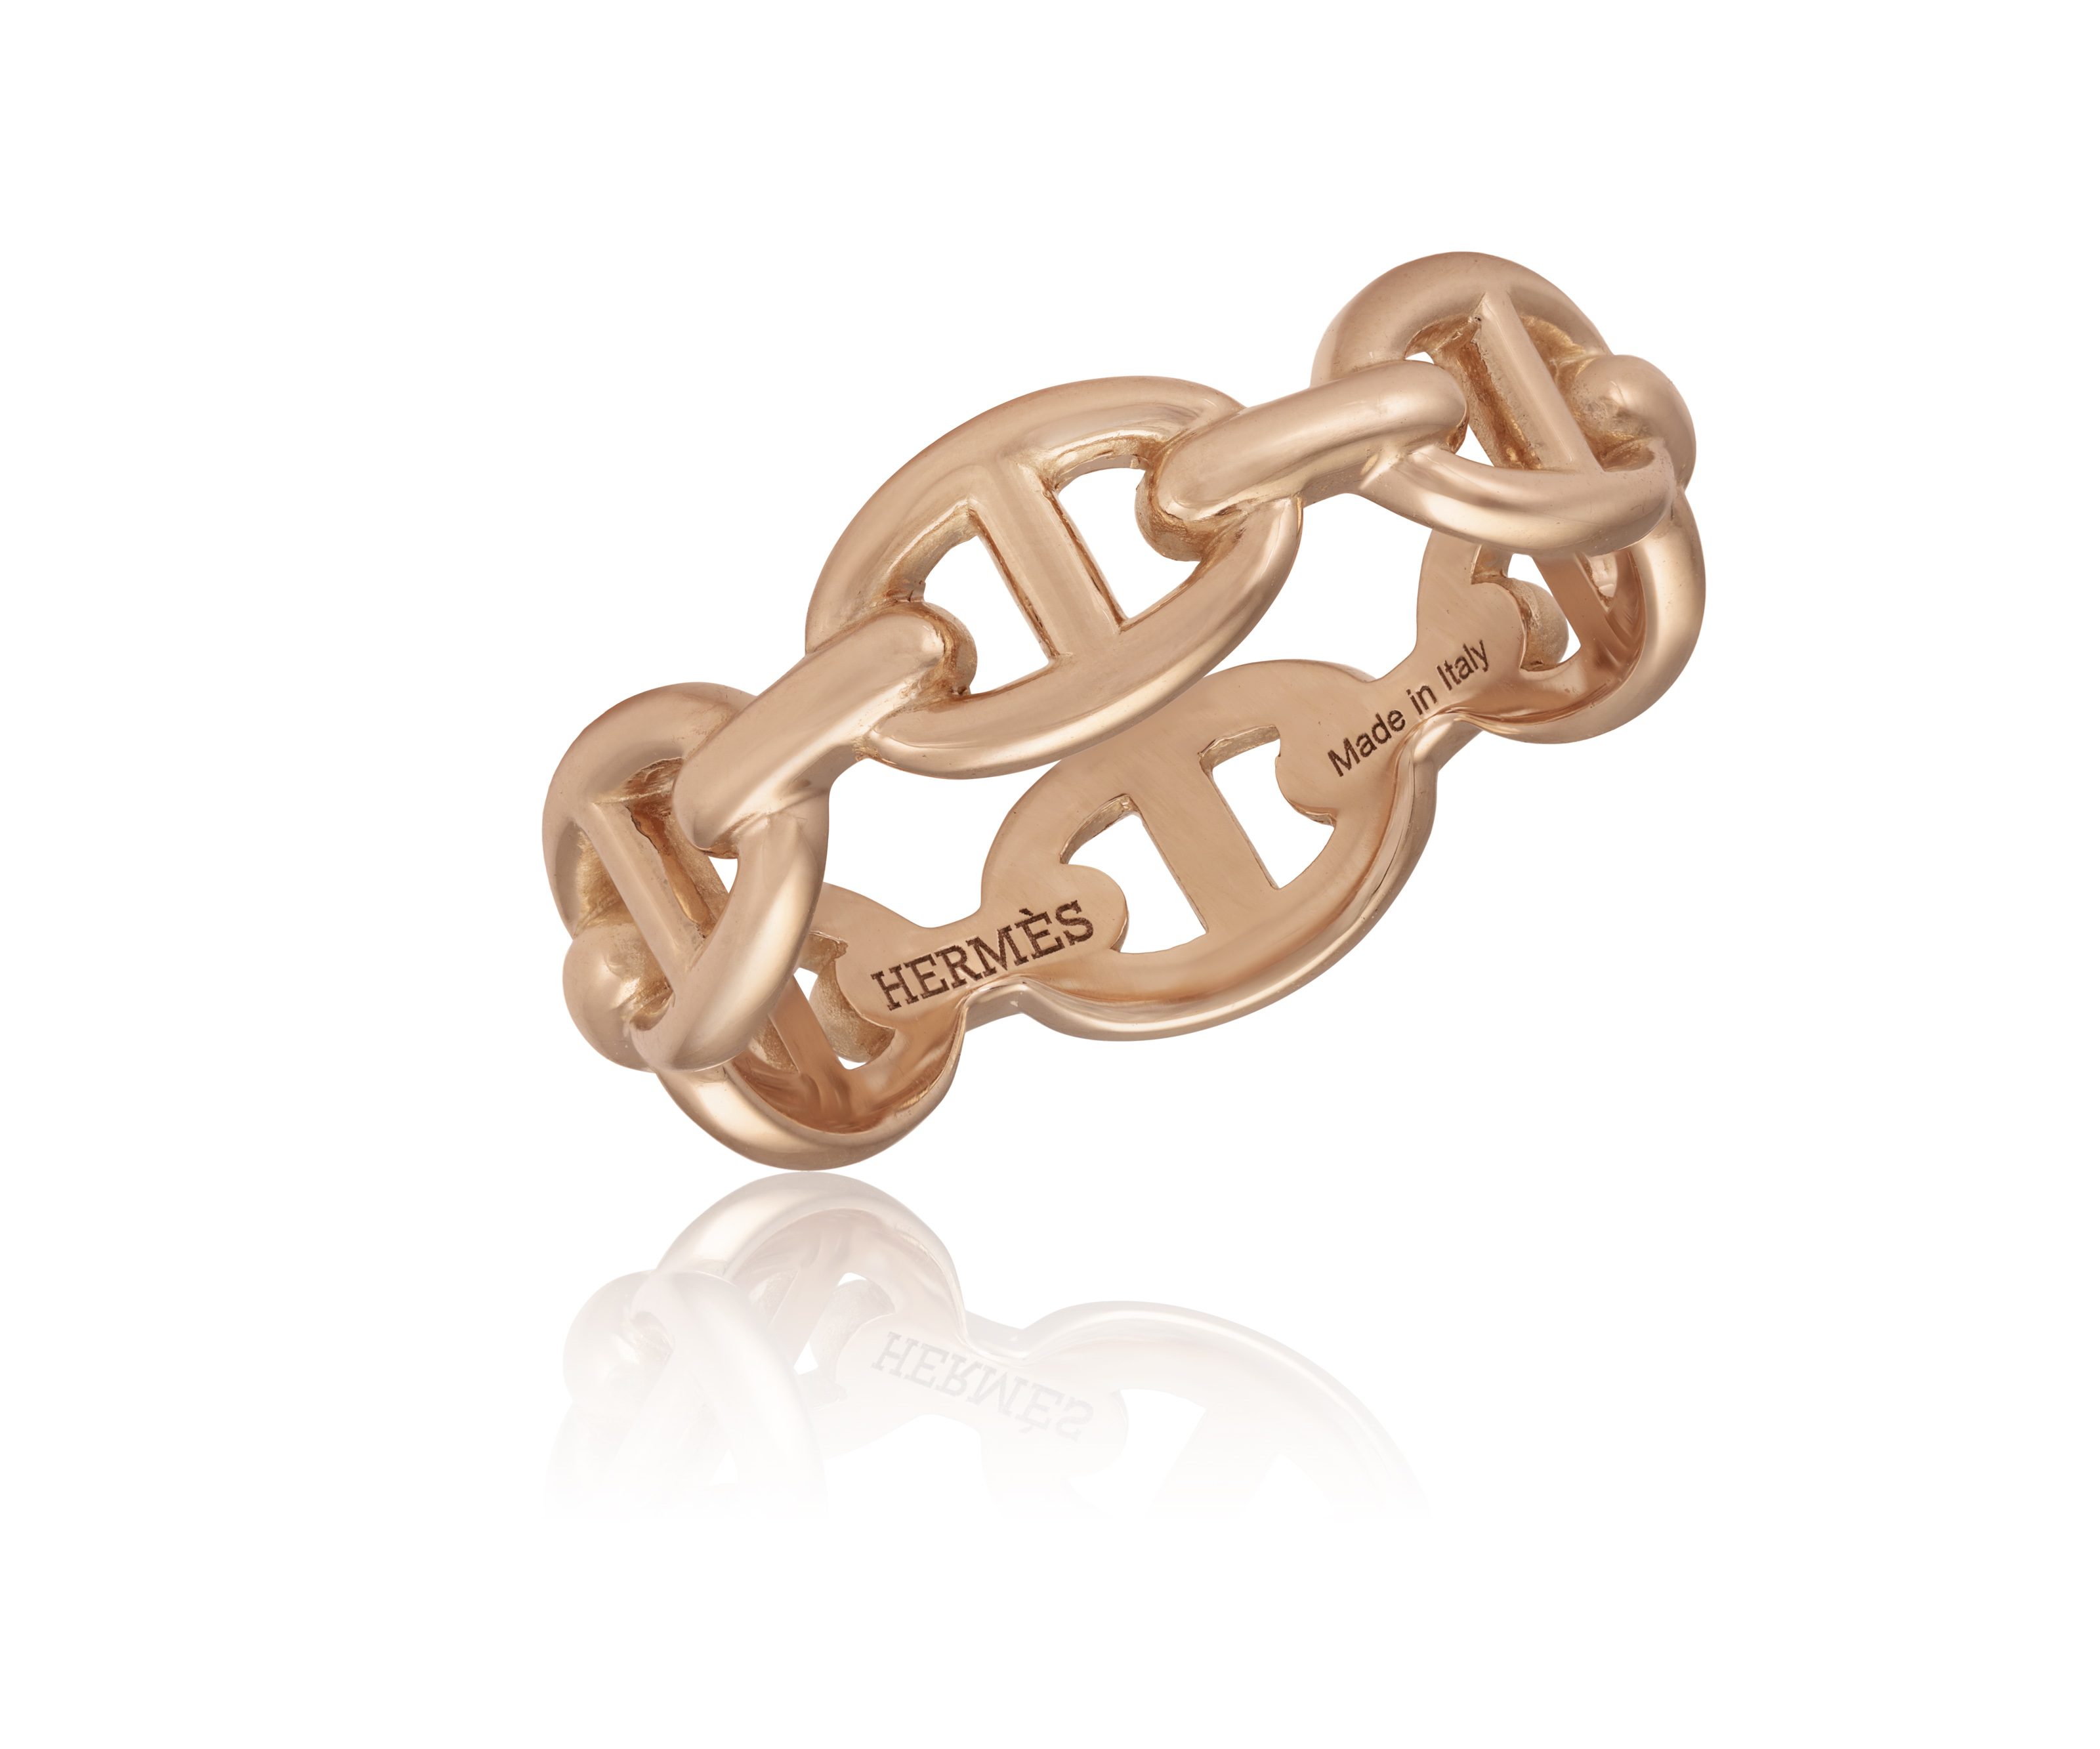 A GOLD 'CHAÎNE D'ANCRE ENCHAÎNÉE' RING, BY HERMÈS Composed of a continuous row of rigid anchor chain